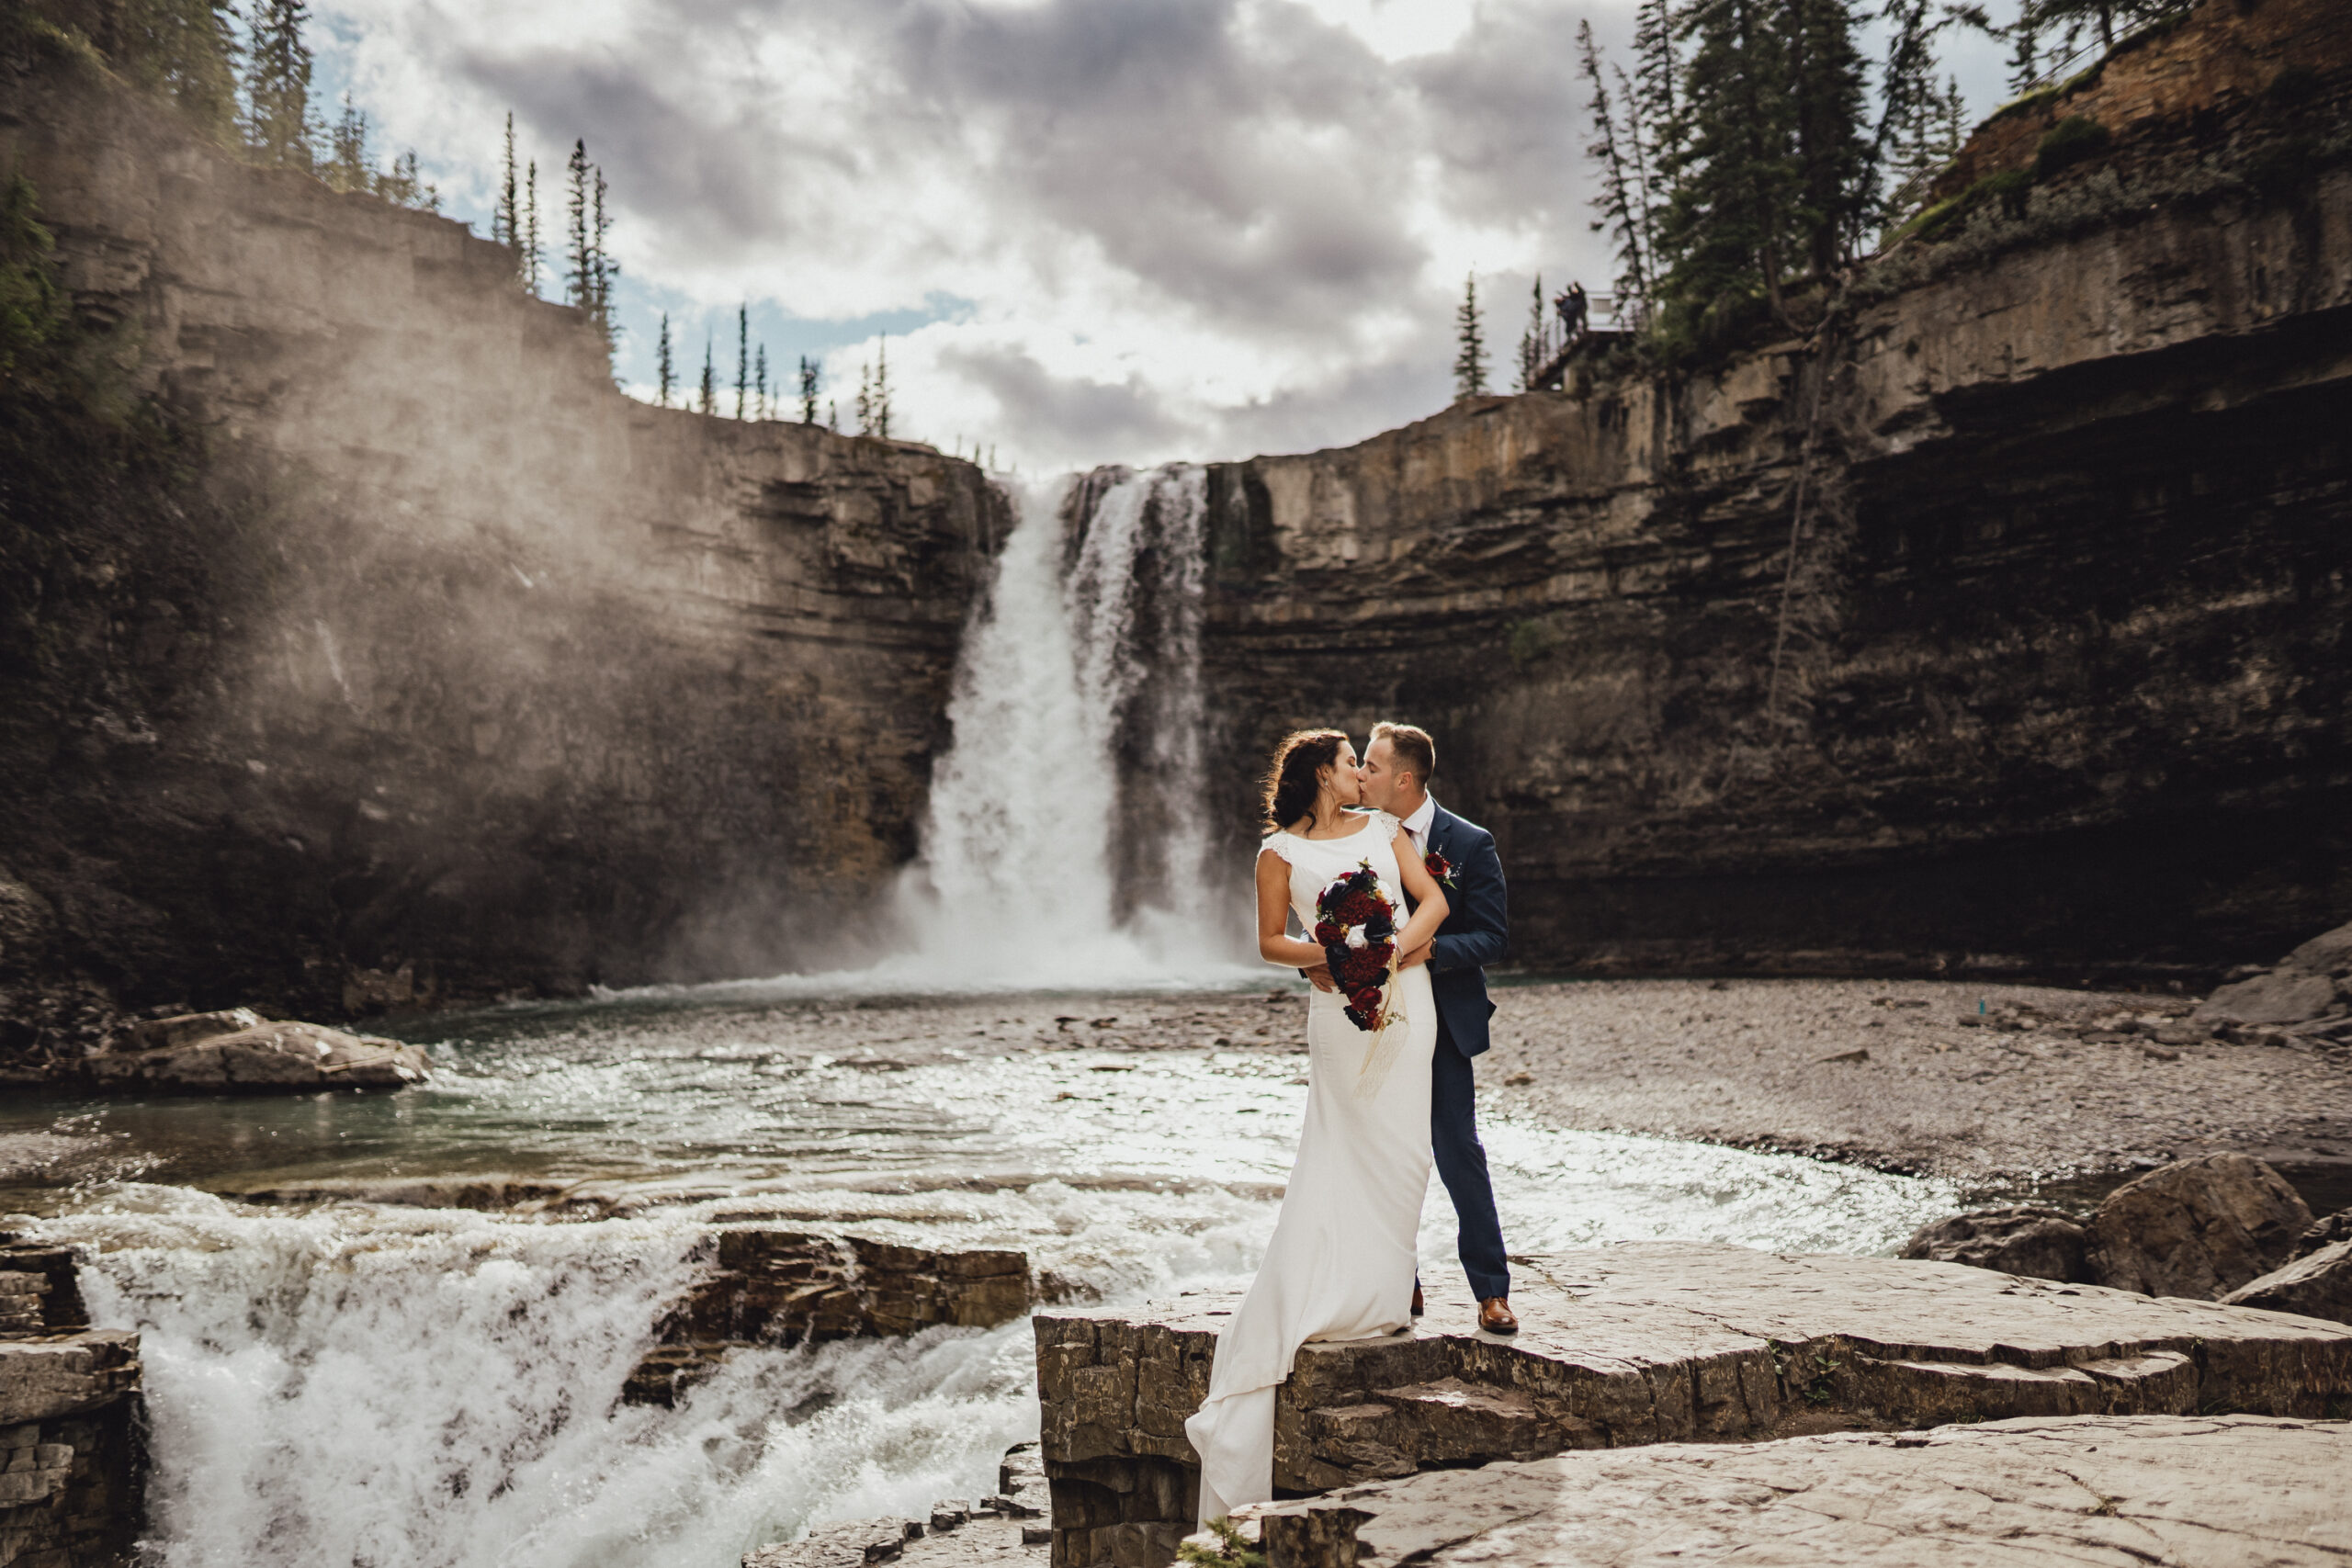 Classic wedding couple kissing in front of waterfall